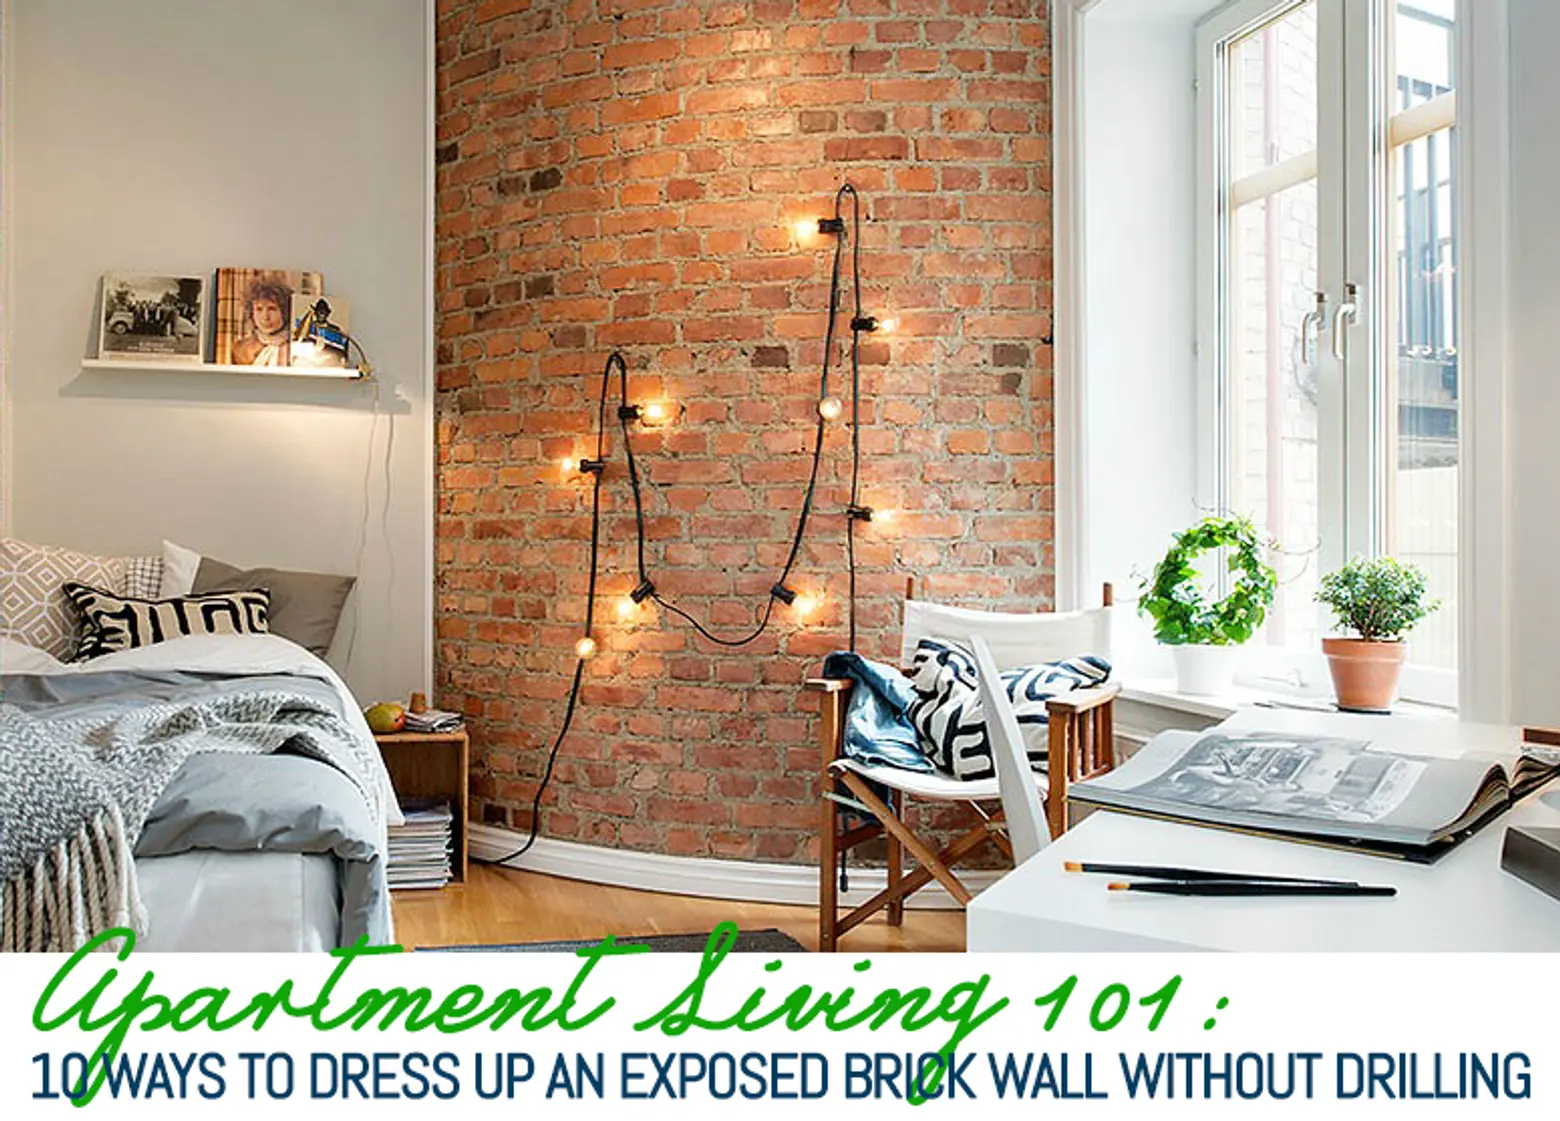 10 Ways to Decorate an Exposed Brick Wall Without Drilling